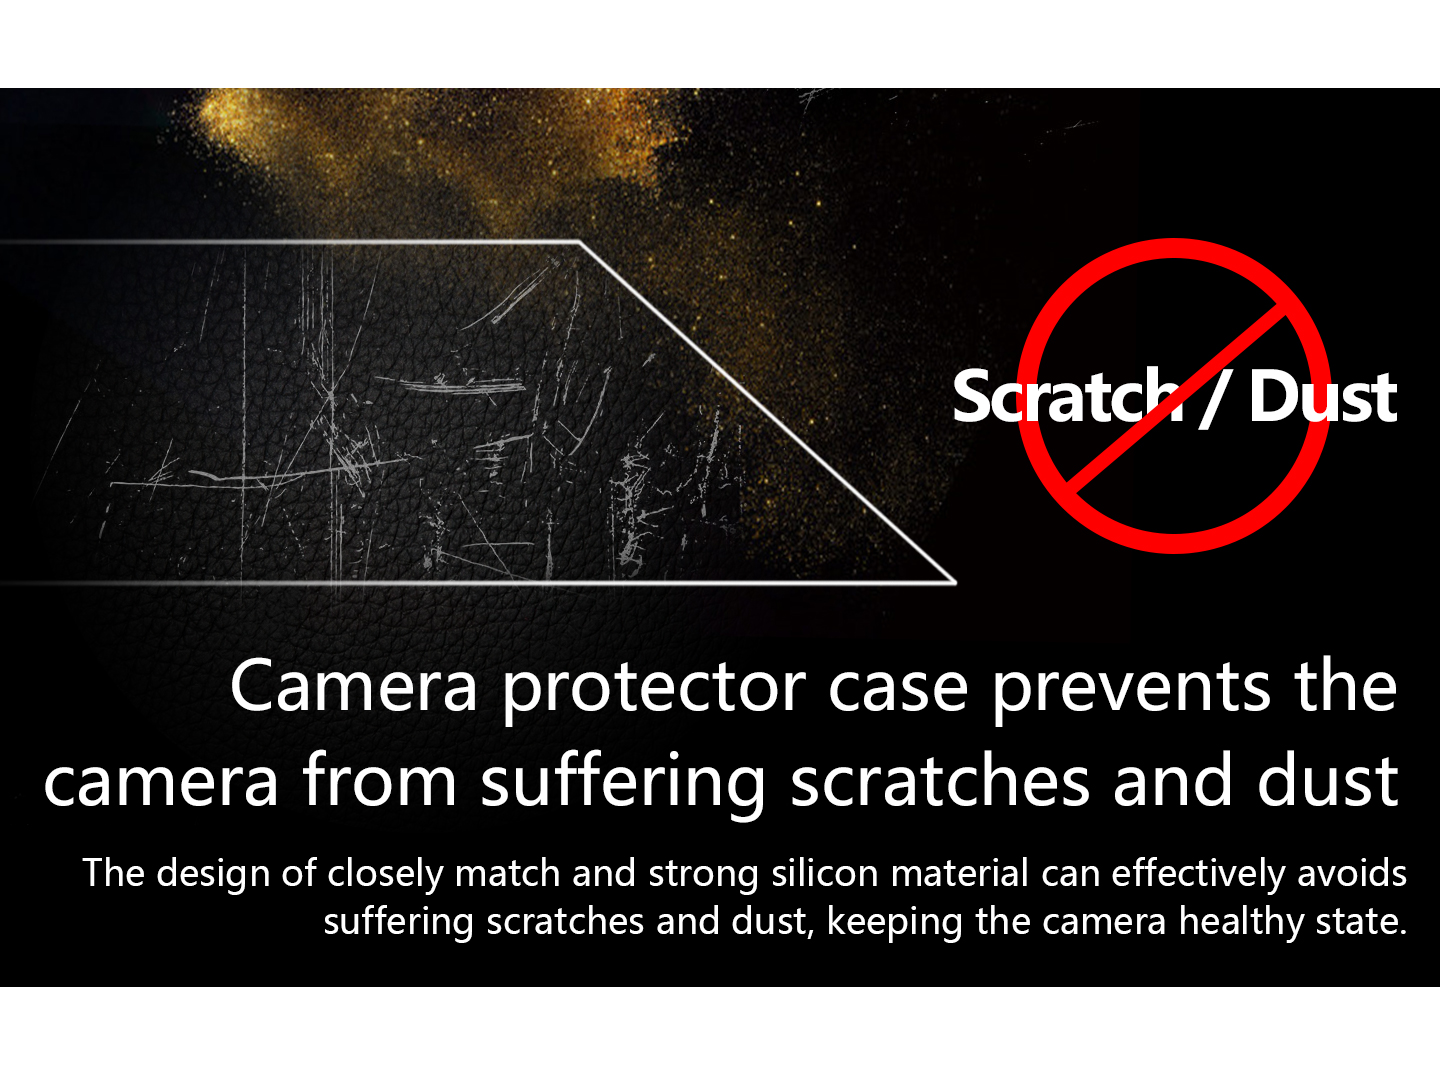 Camera protector case prevents the camera from suffering scratches and dust